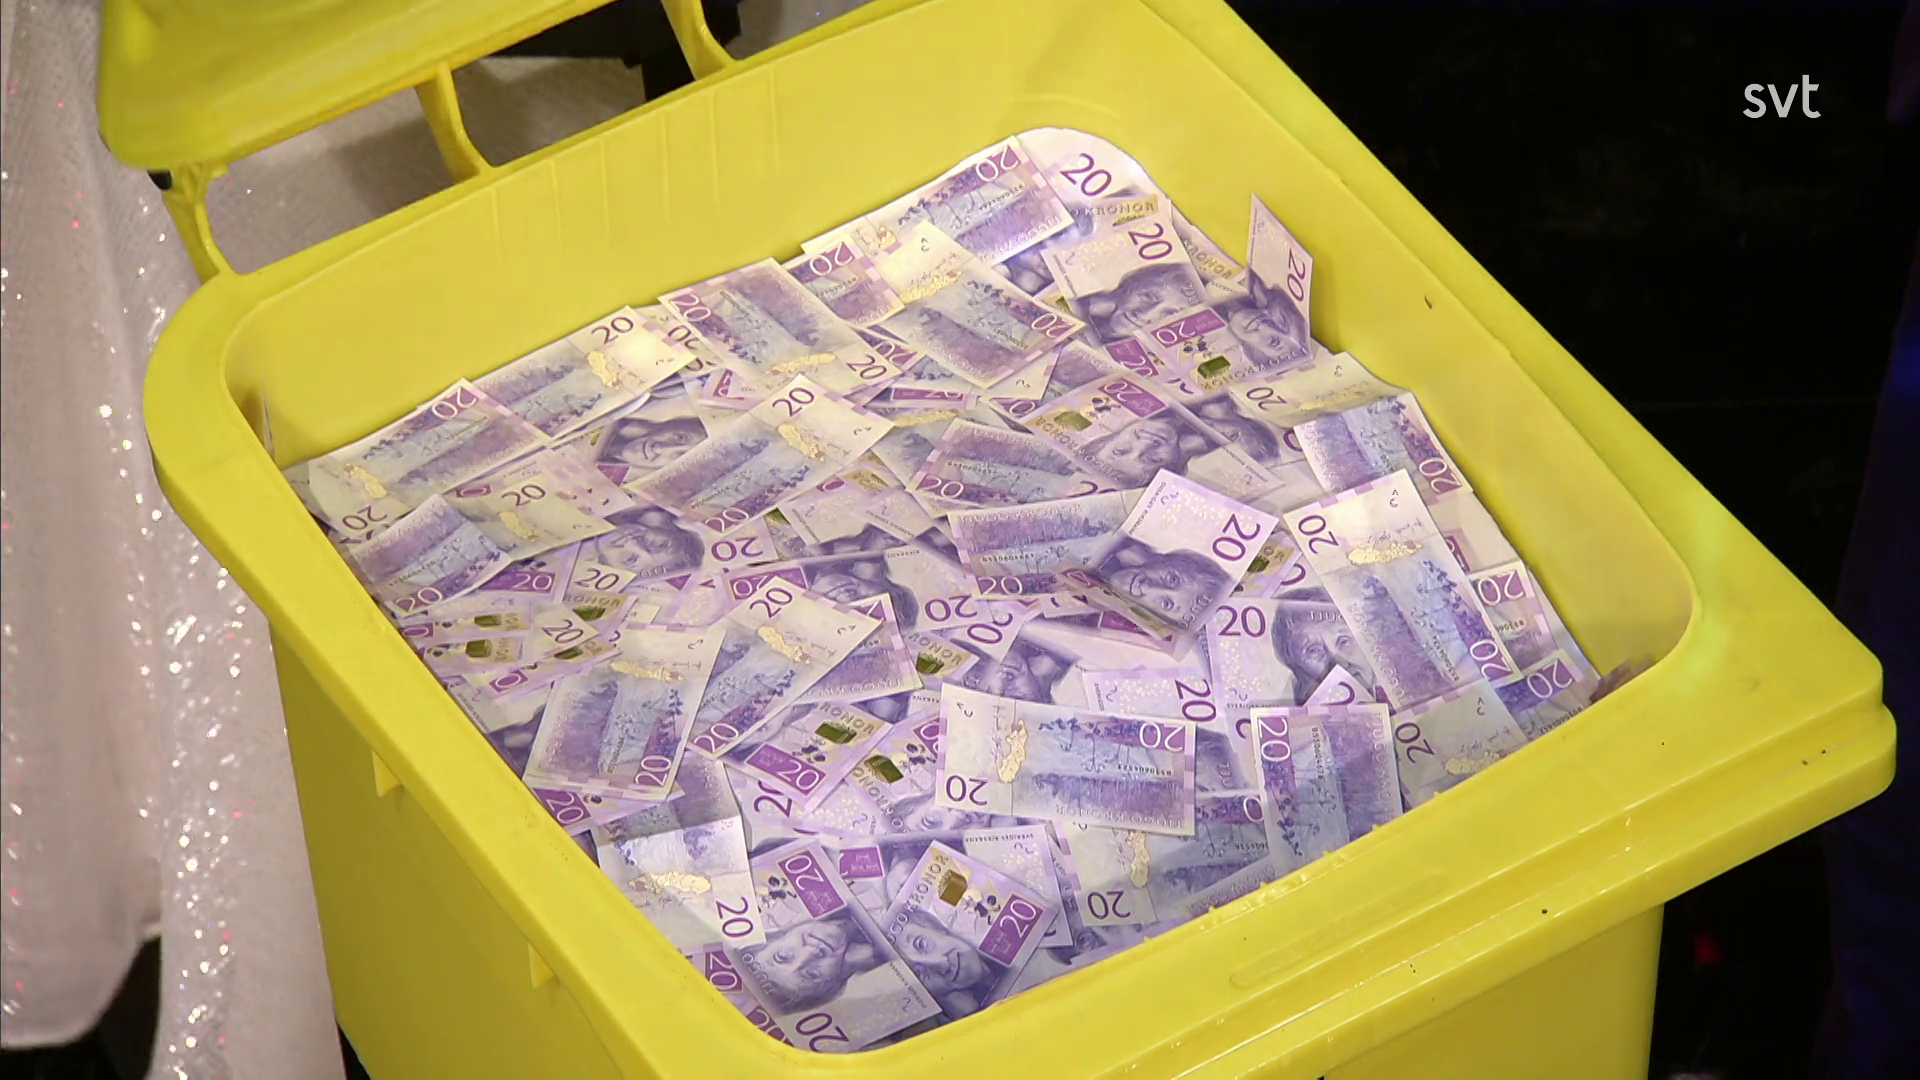 Image of the prize for this episode: the secret contents of ‘Bin 1’ from the ‘Identify which bin David is in’ task, which turns out to be a stack of money.